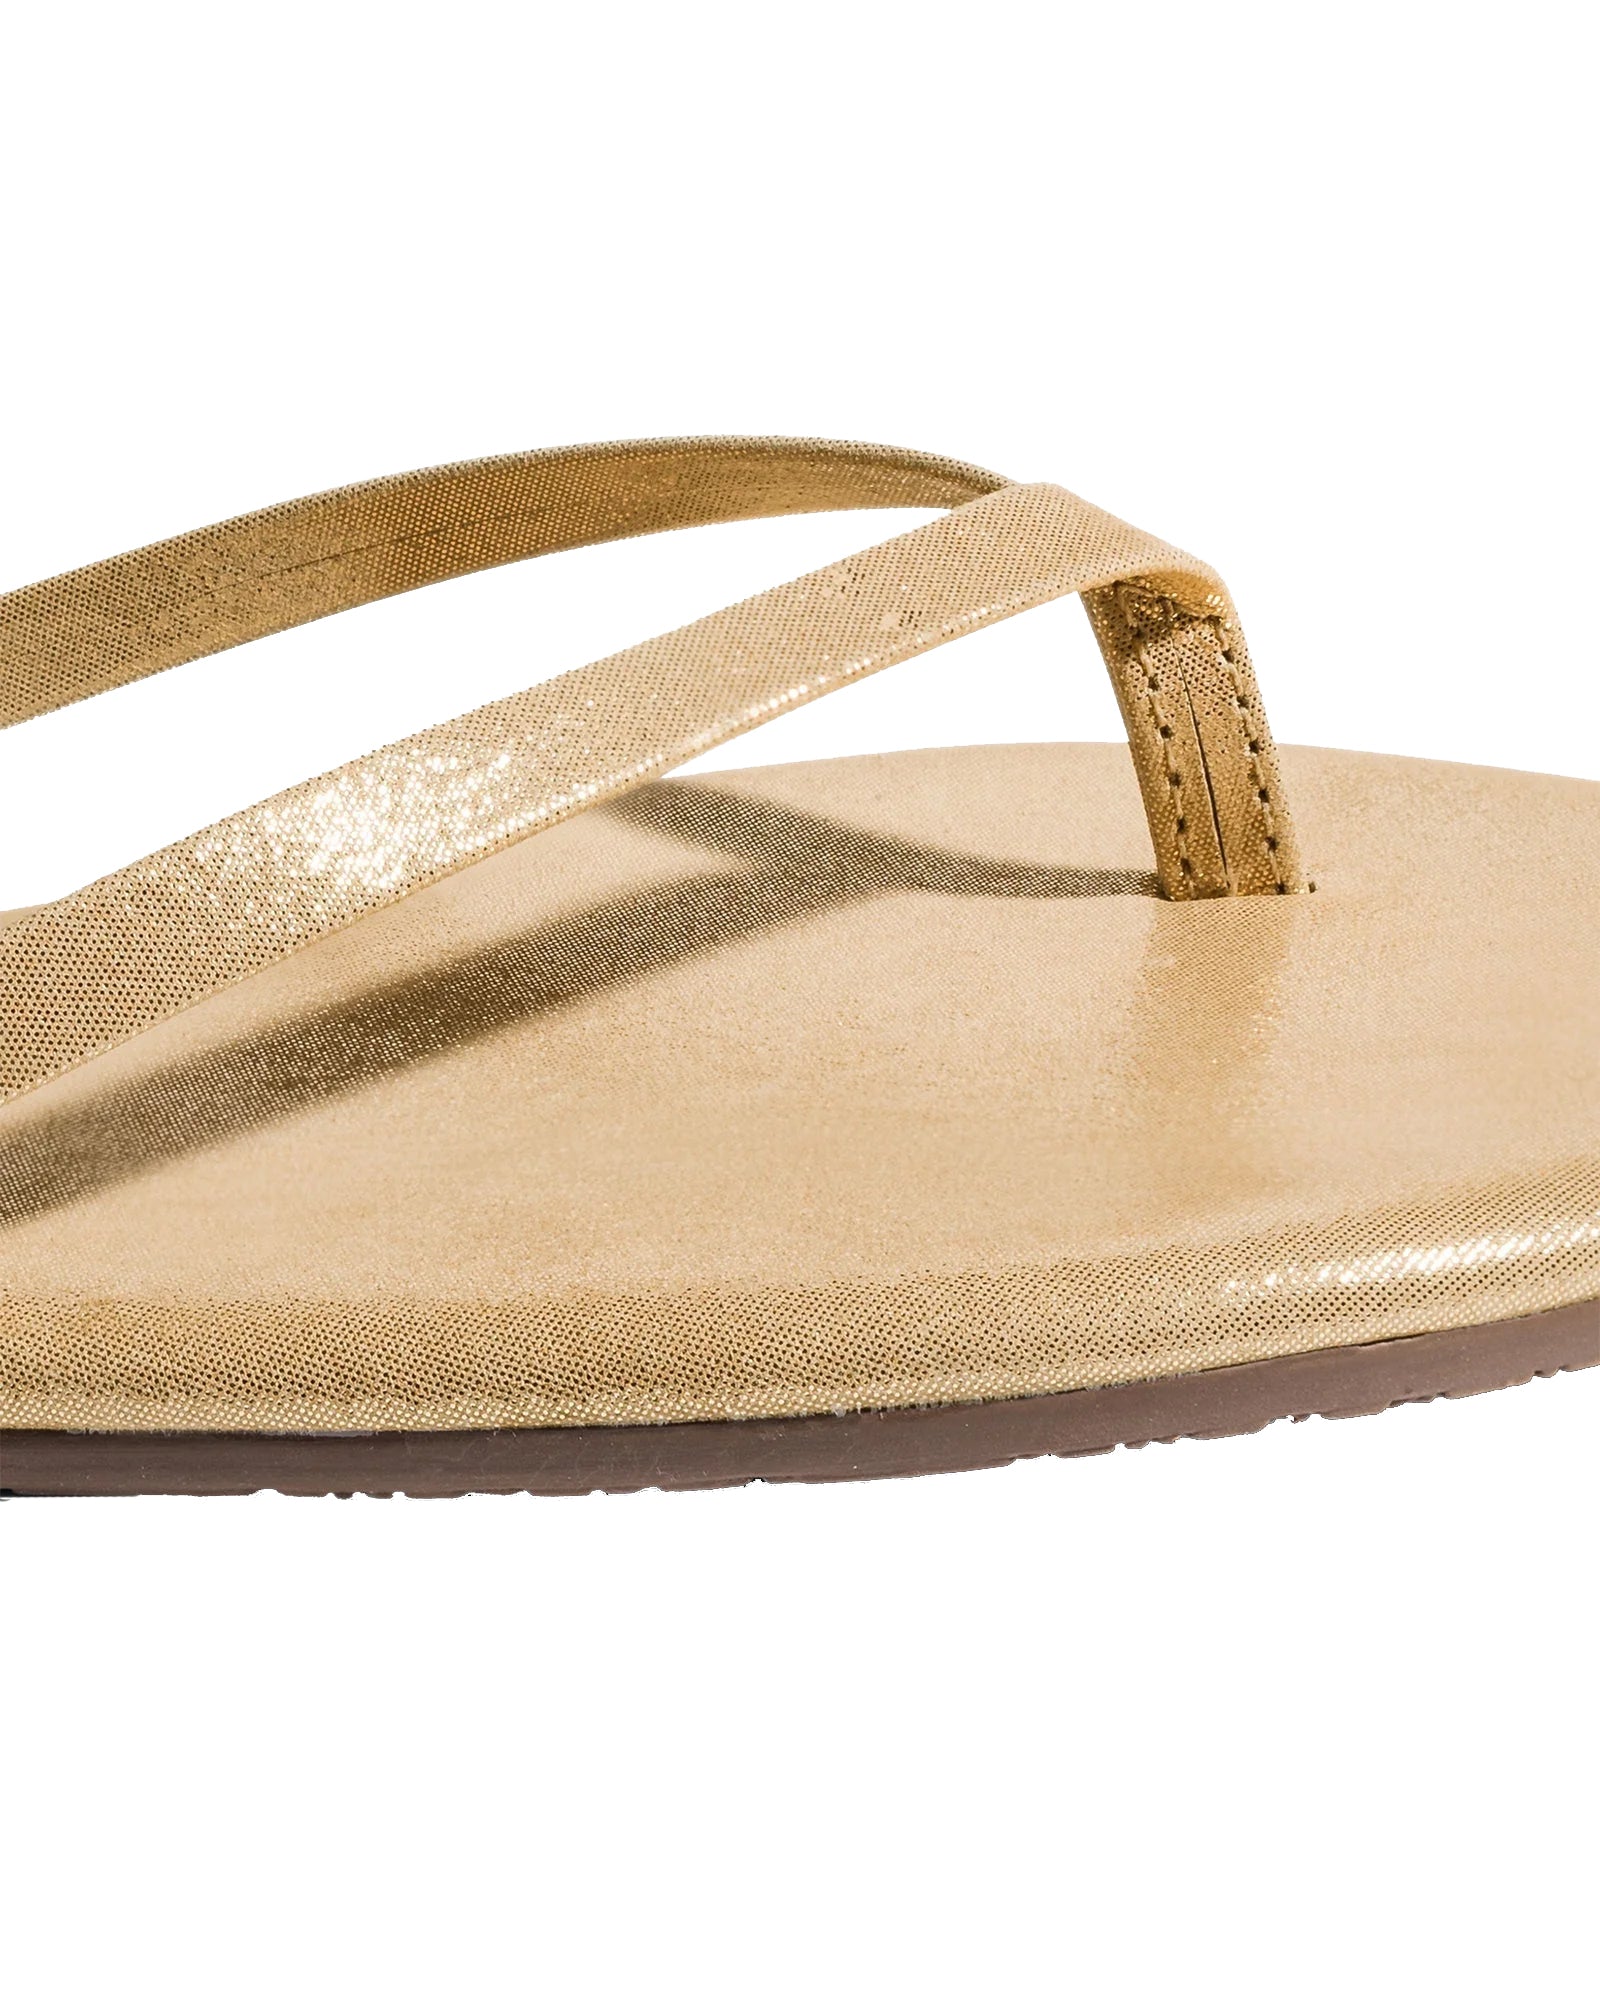 Lily Sandals (Gold Glitter)